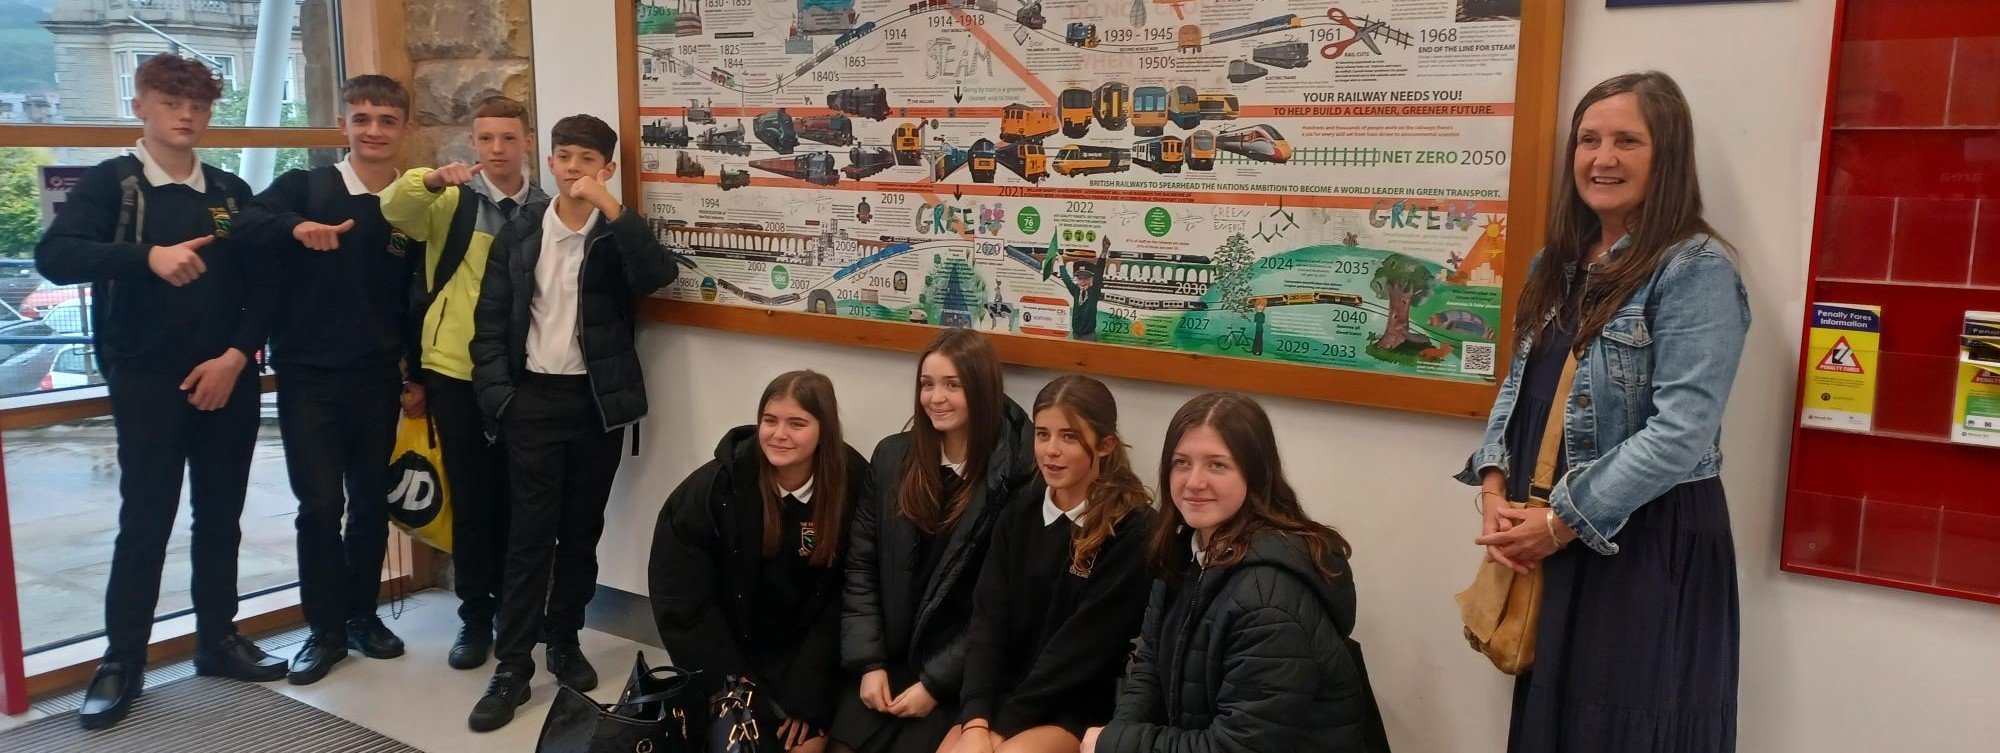 image-shows-karen-allerton-with-students-from-the-hollins-secondary-school